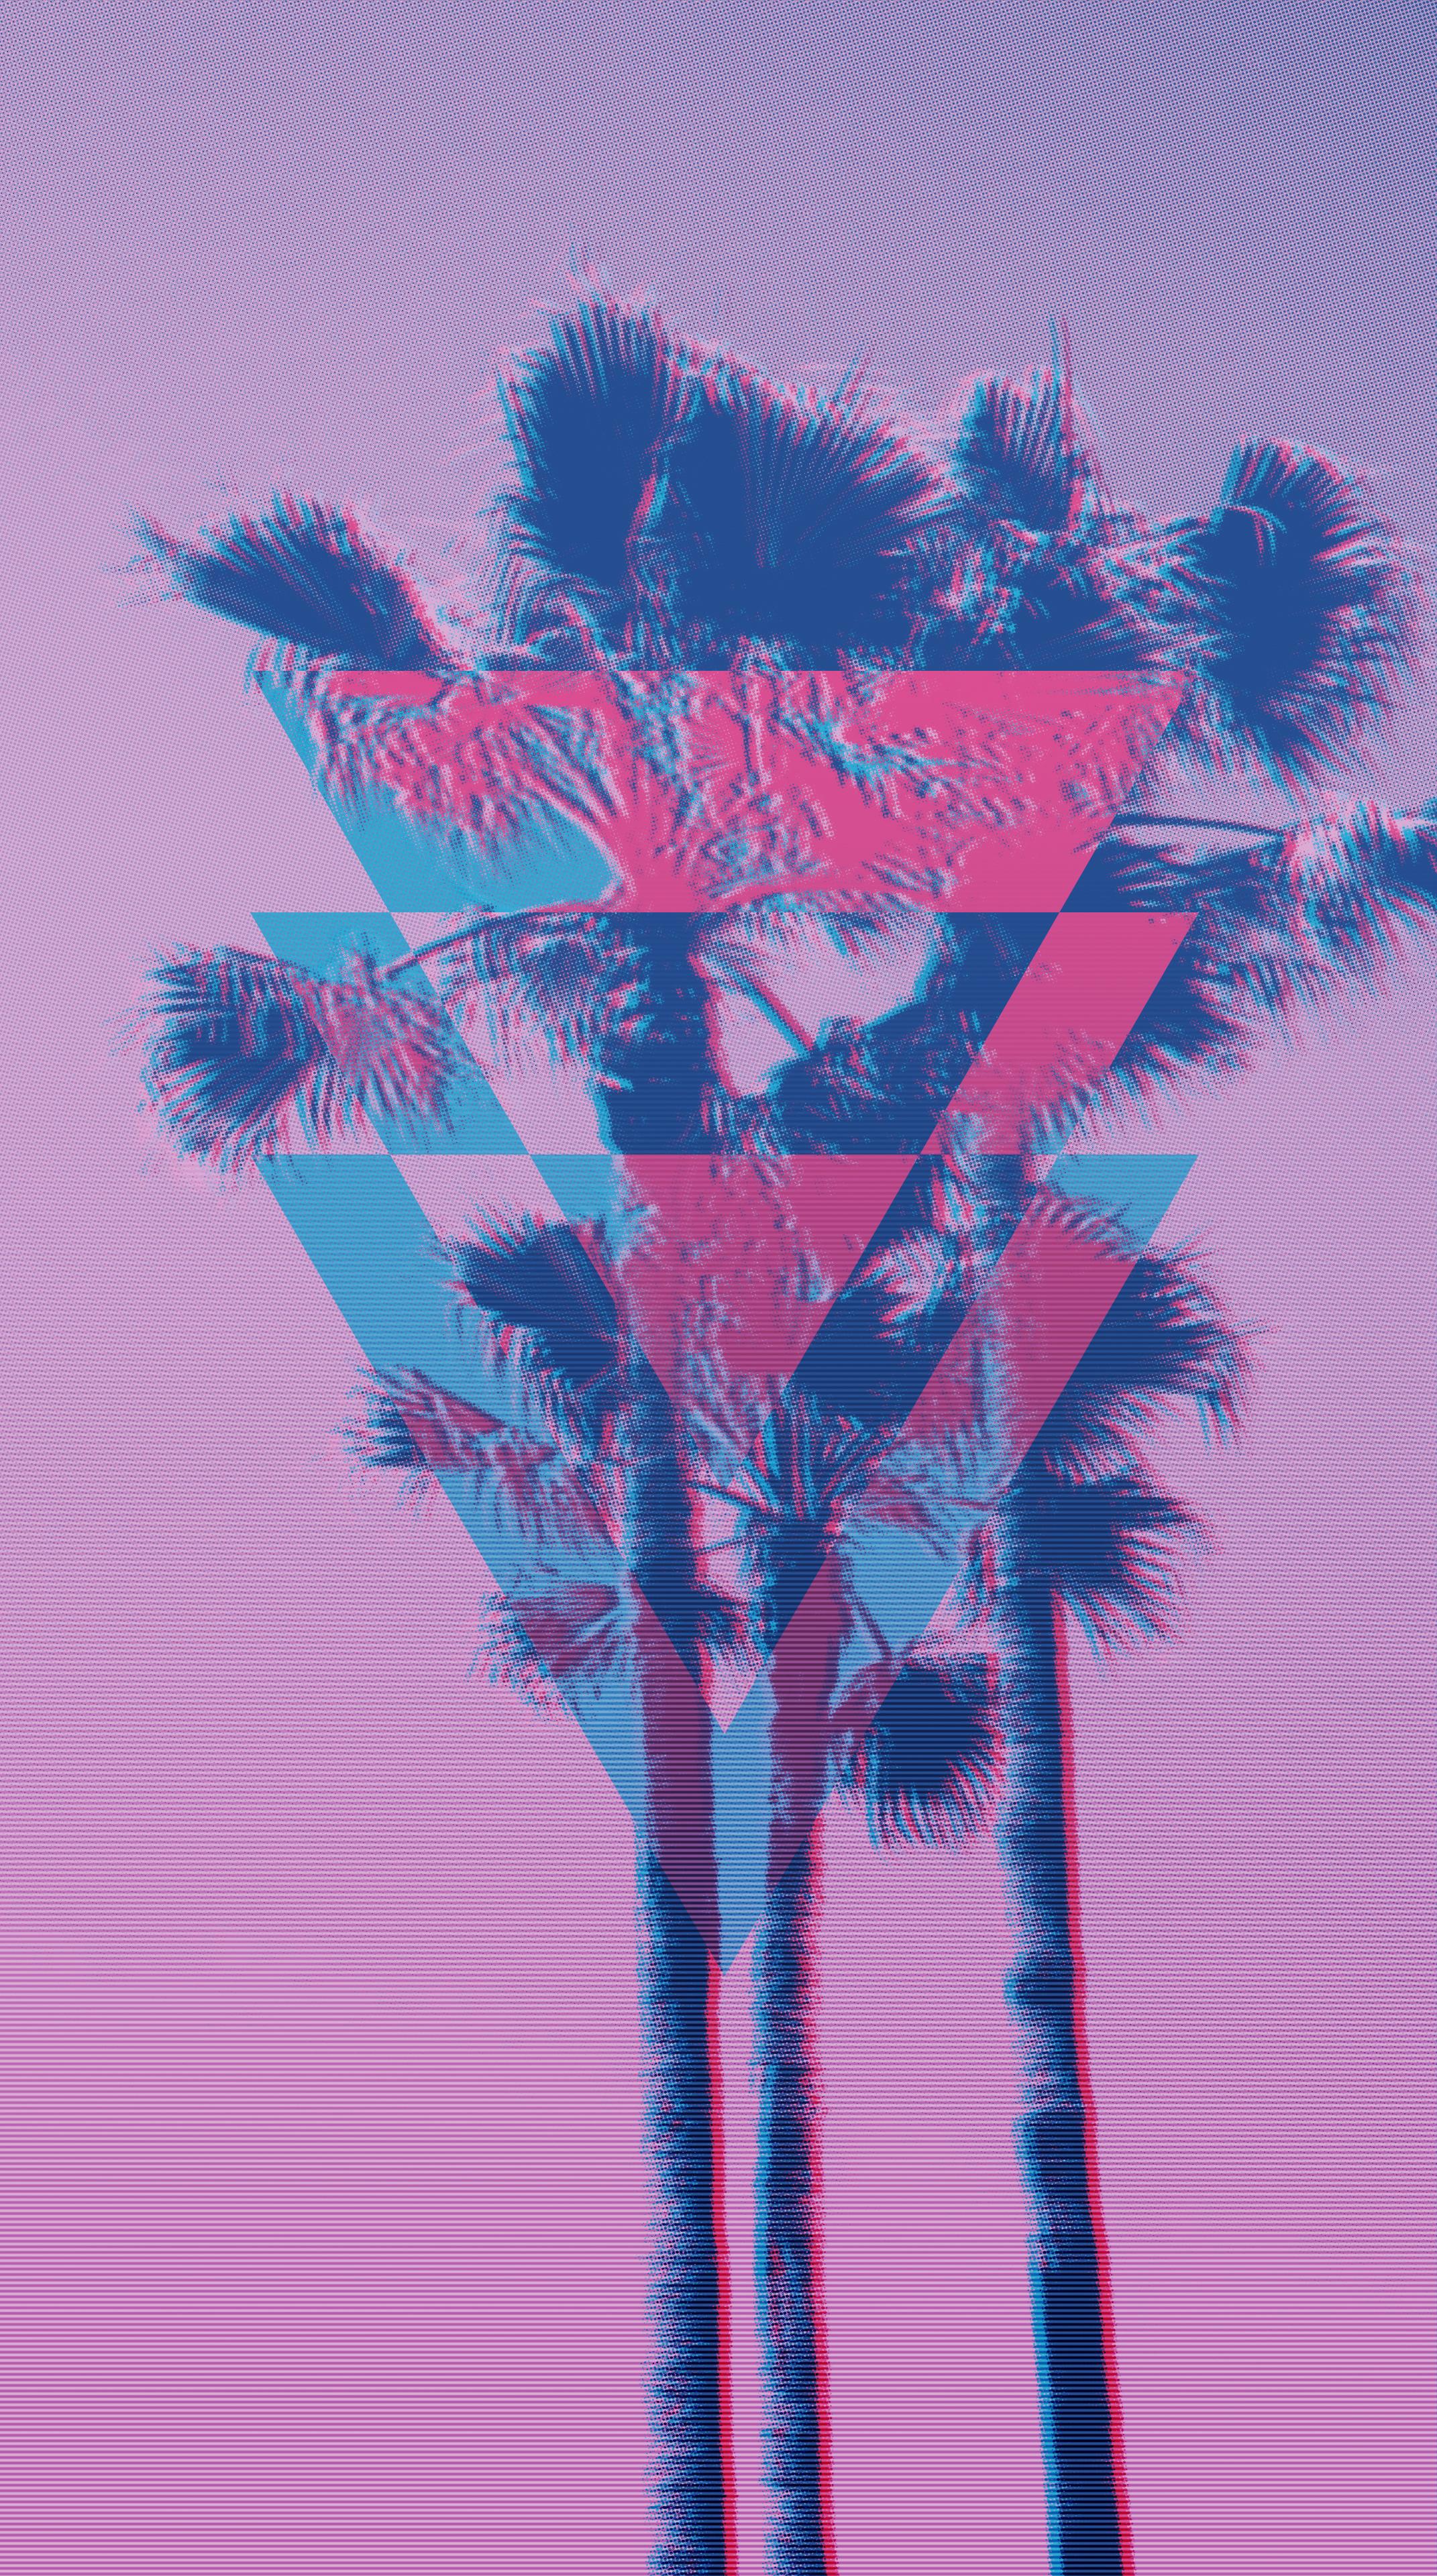 A quick Vaporwave phone wallpaper I made today